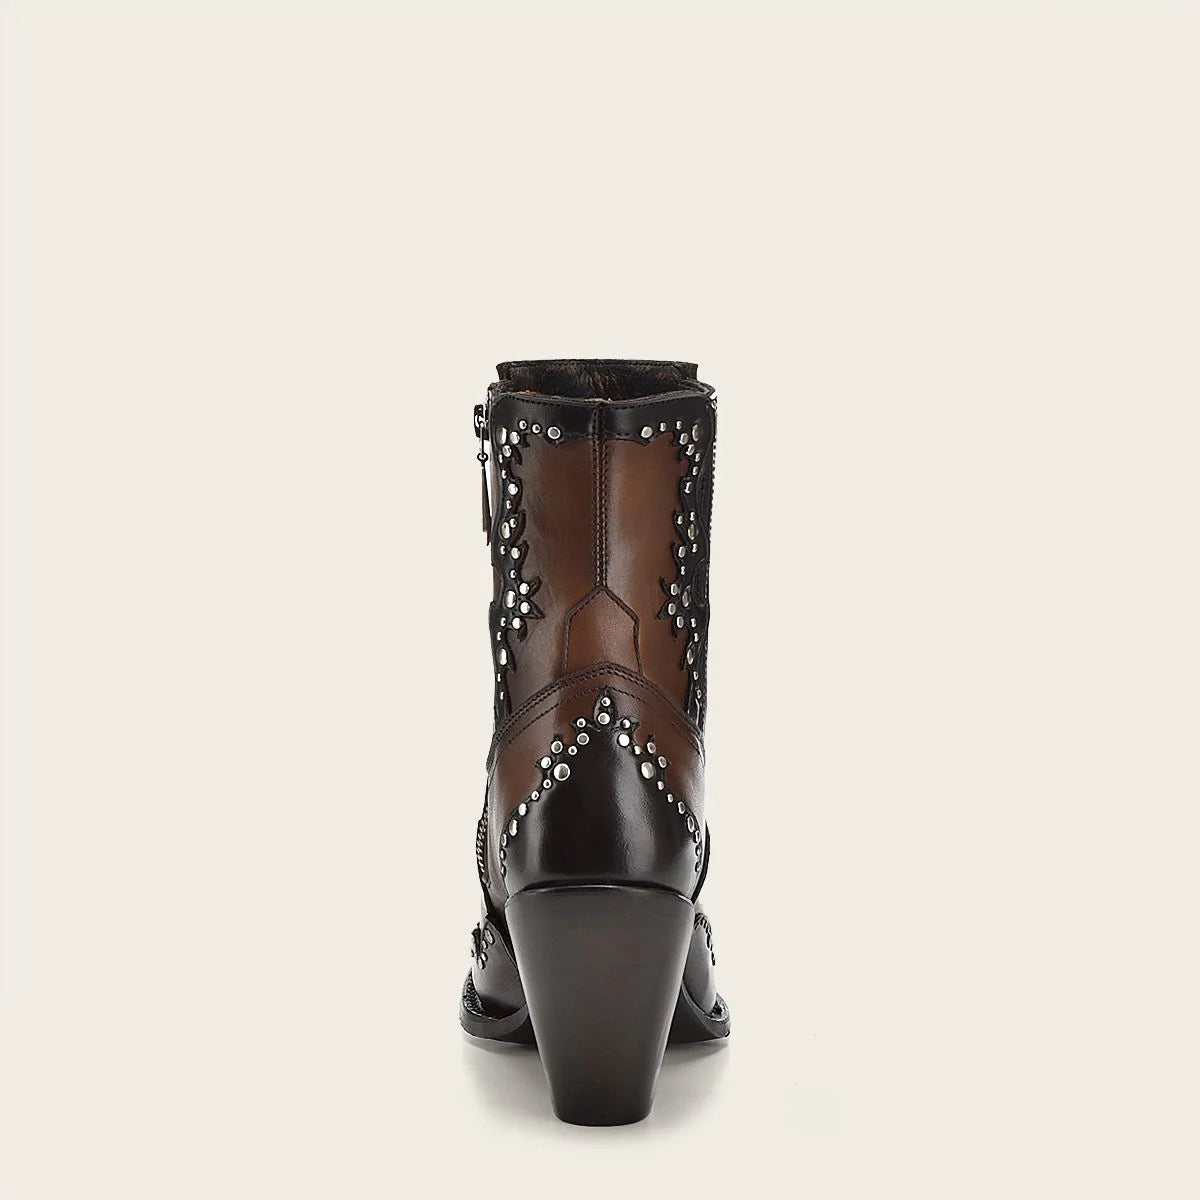 Brown leather western style bootie with studs